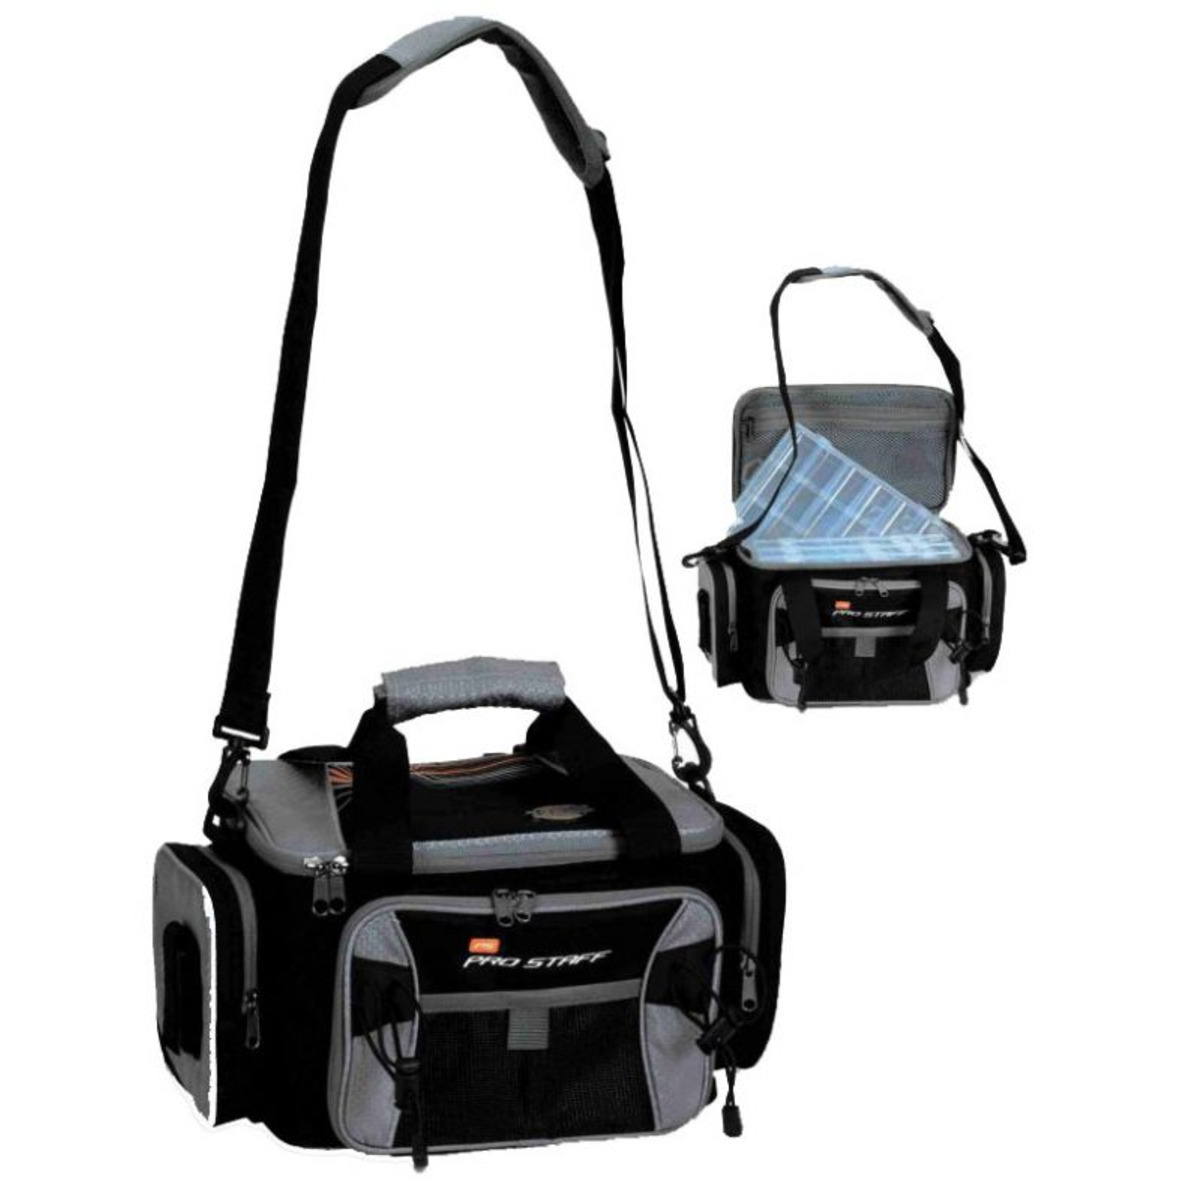 Zebco Pro Staff Deluxe Carry All - 41x25x20 cm